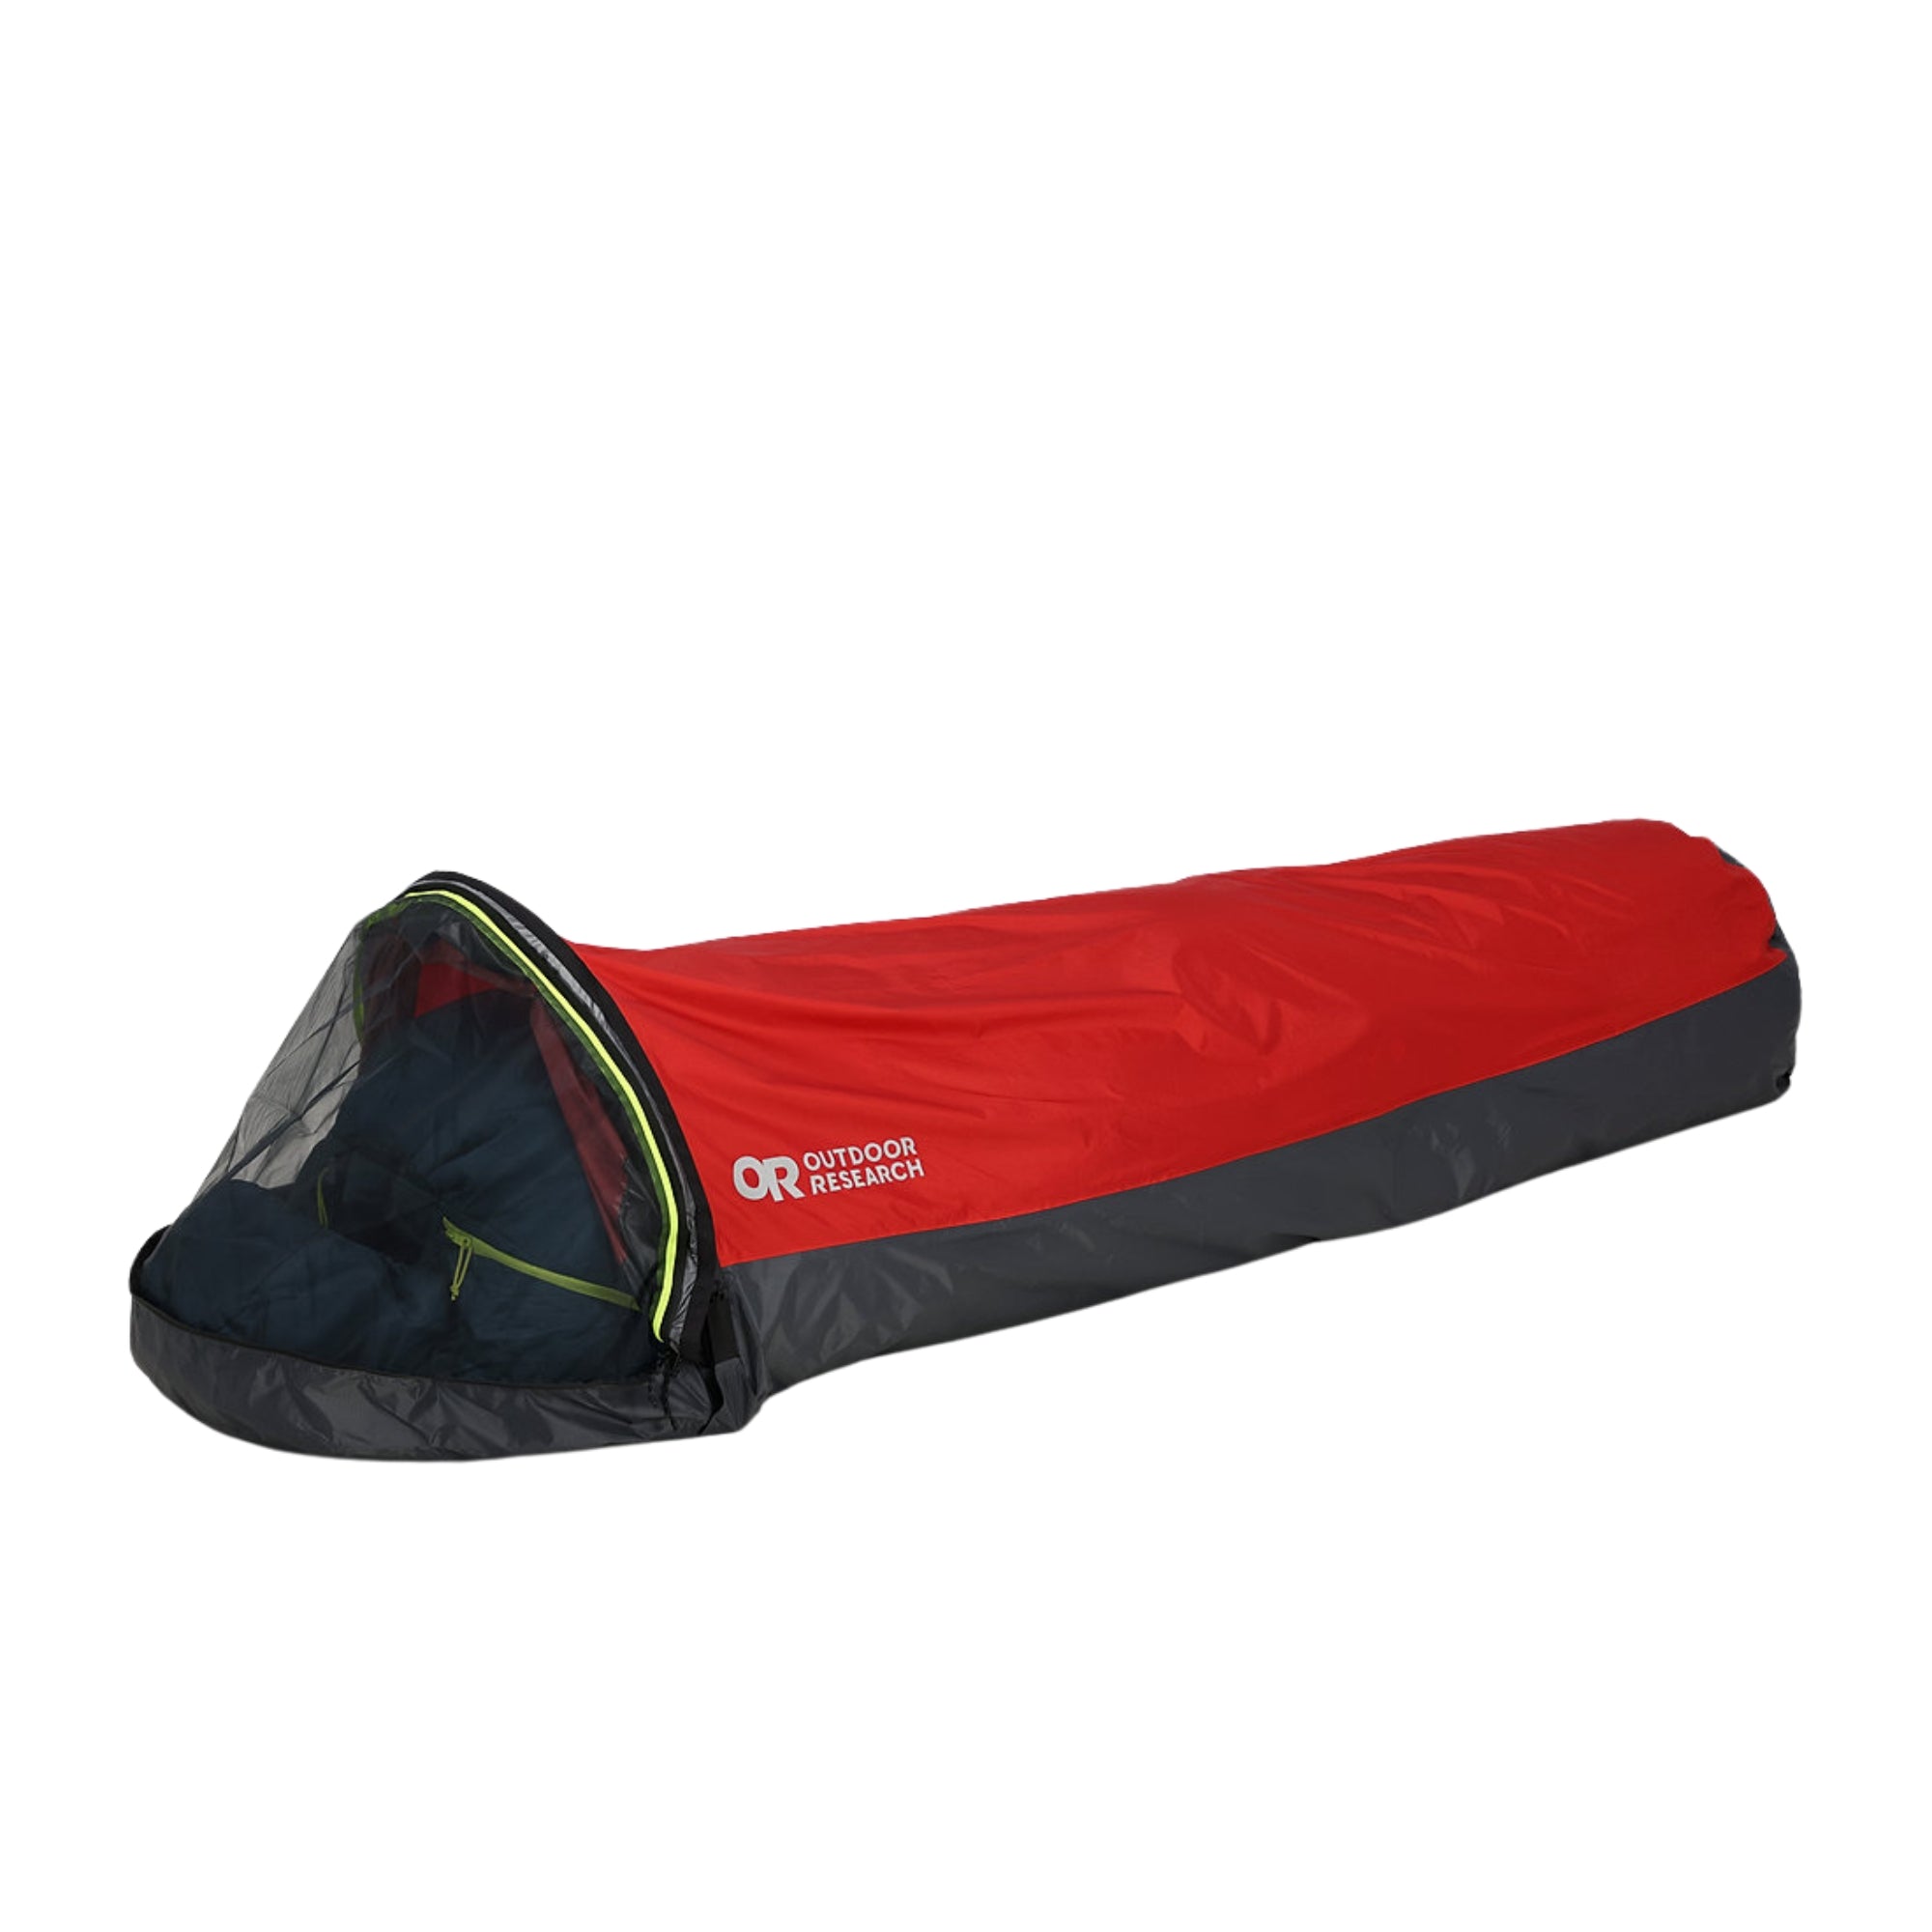 Outdoor Research Helium Bivy in cranberry red